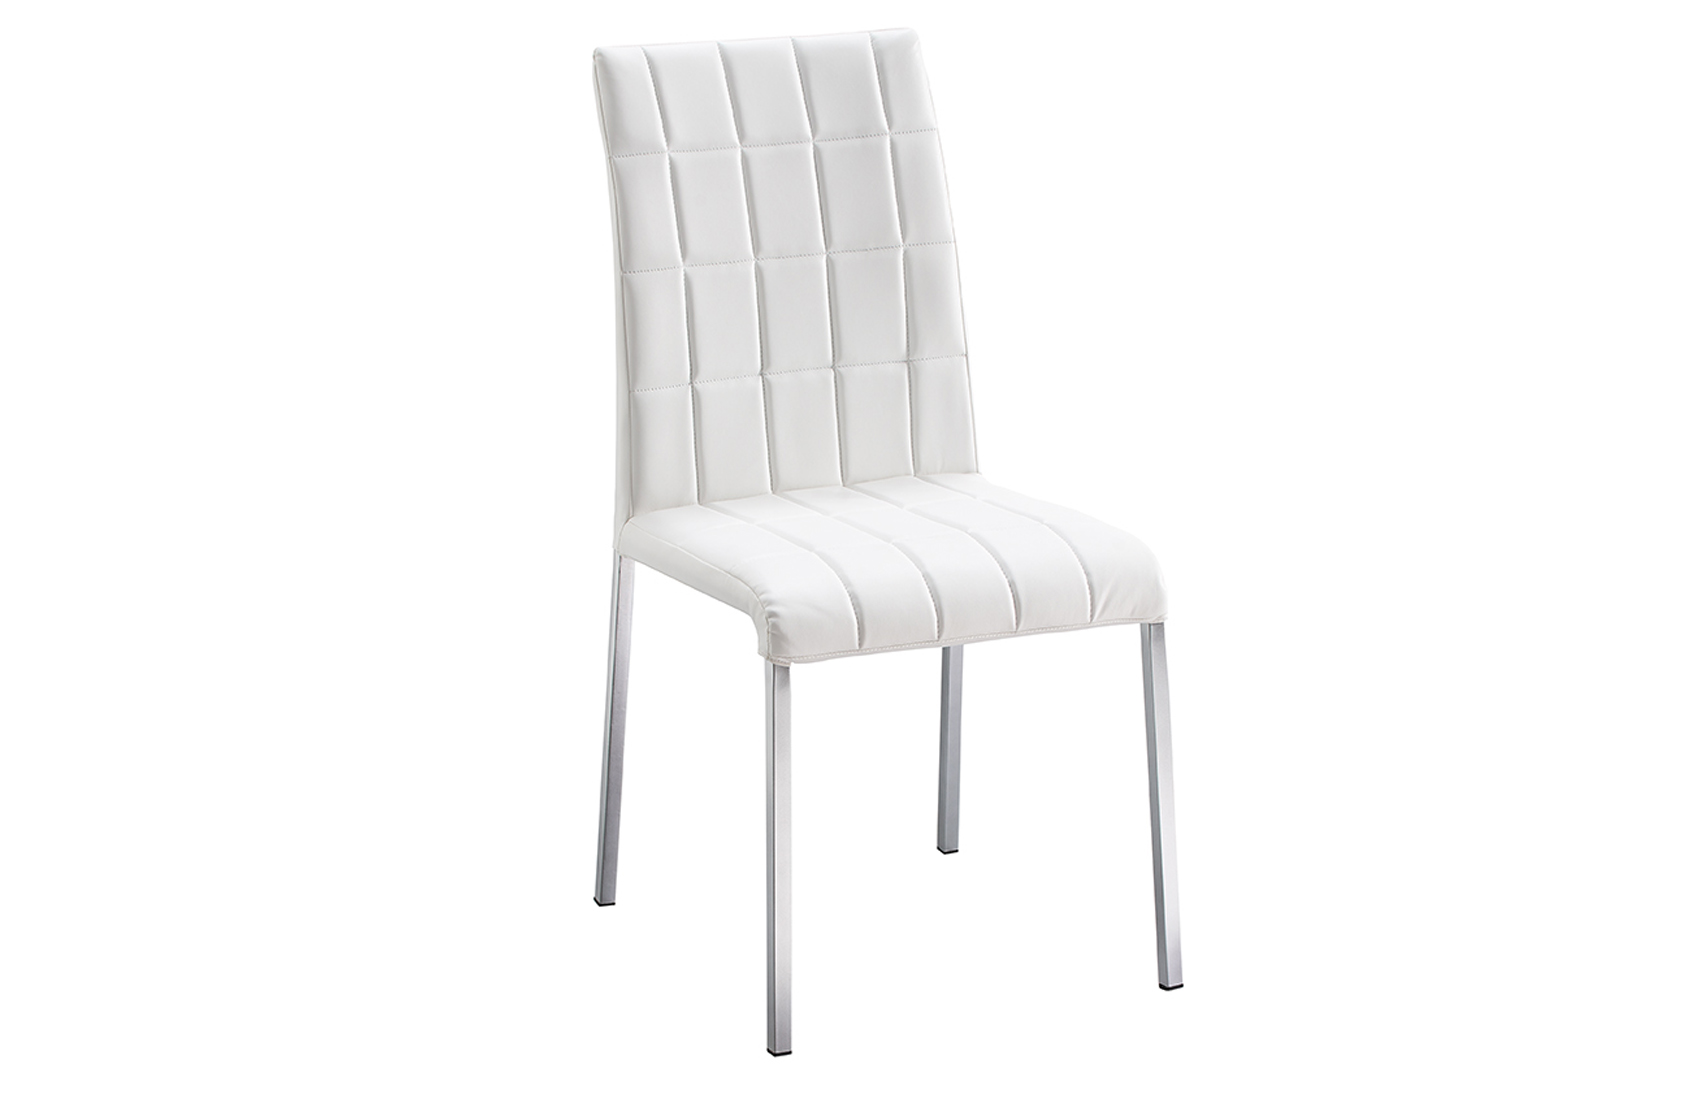 Living Room Furniture Reclining and Sliding Seats Sets 3450 Chair White